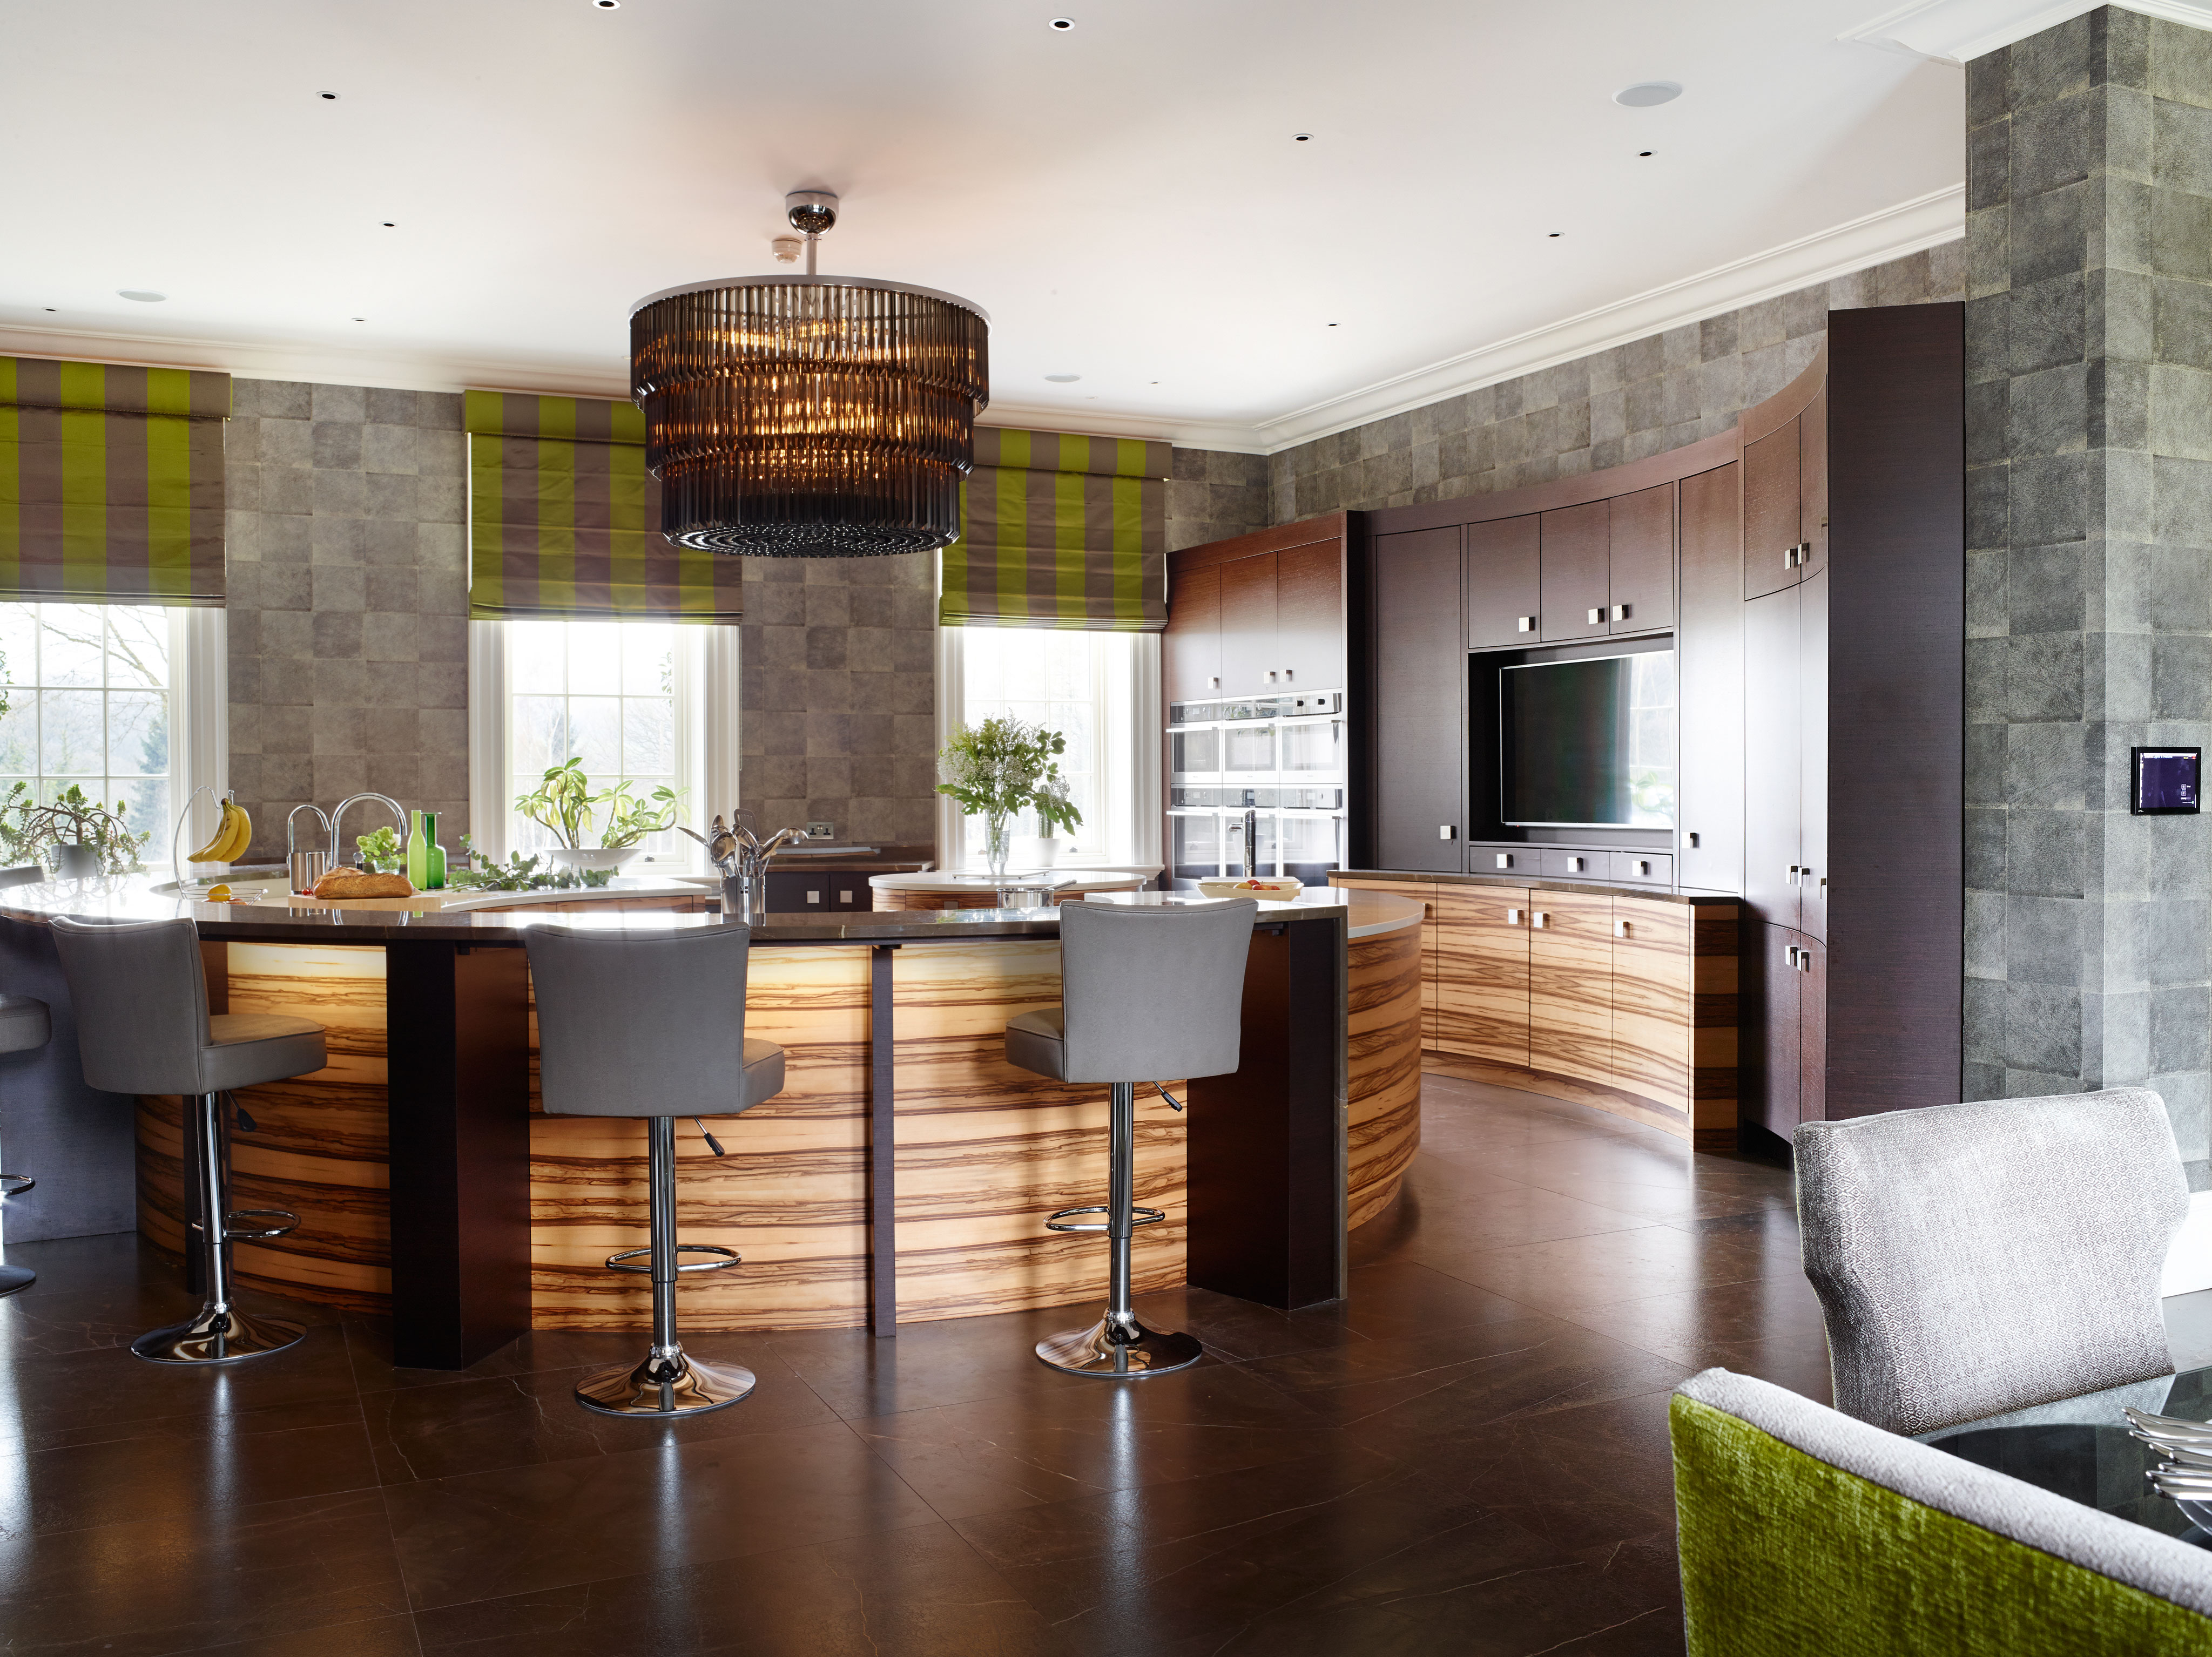 Bespoke Contemporary Kitchen Design in Leicestershire UK